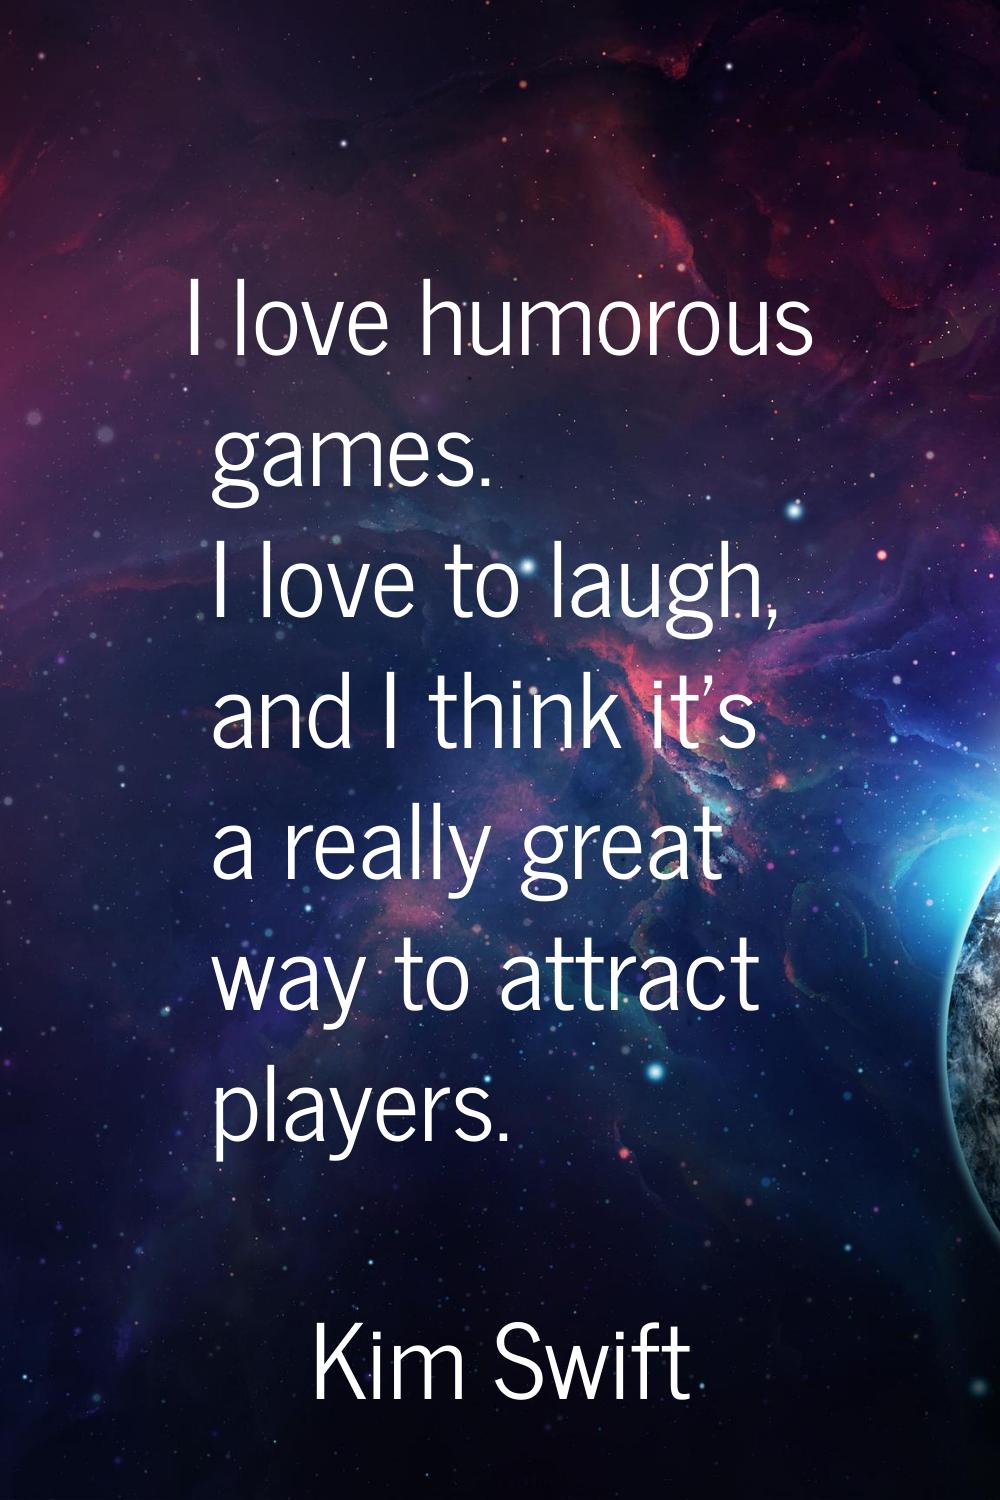 I love humorous games. I love to laugh, and I think it's a really great way to attract players.